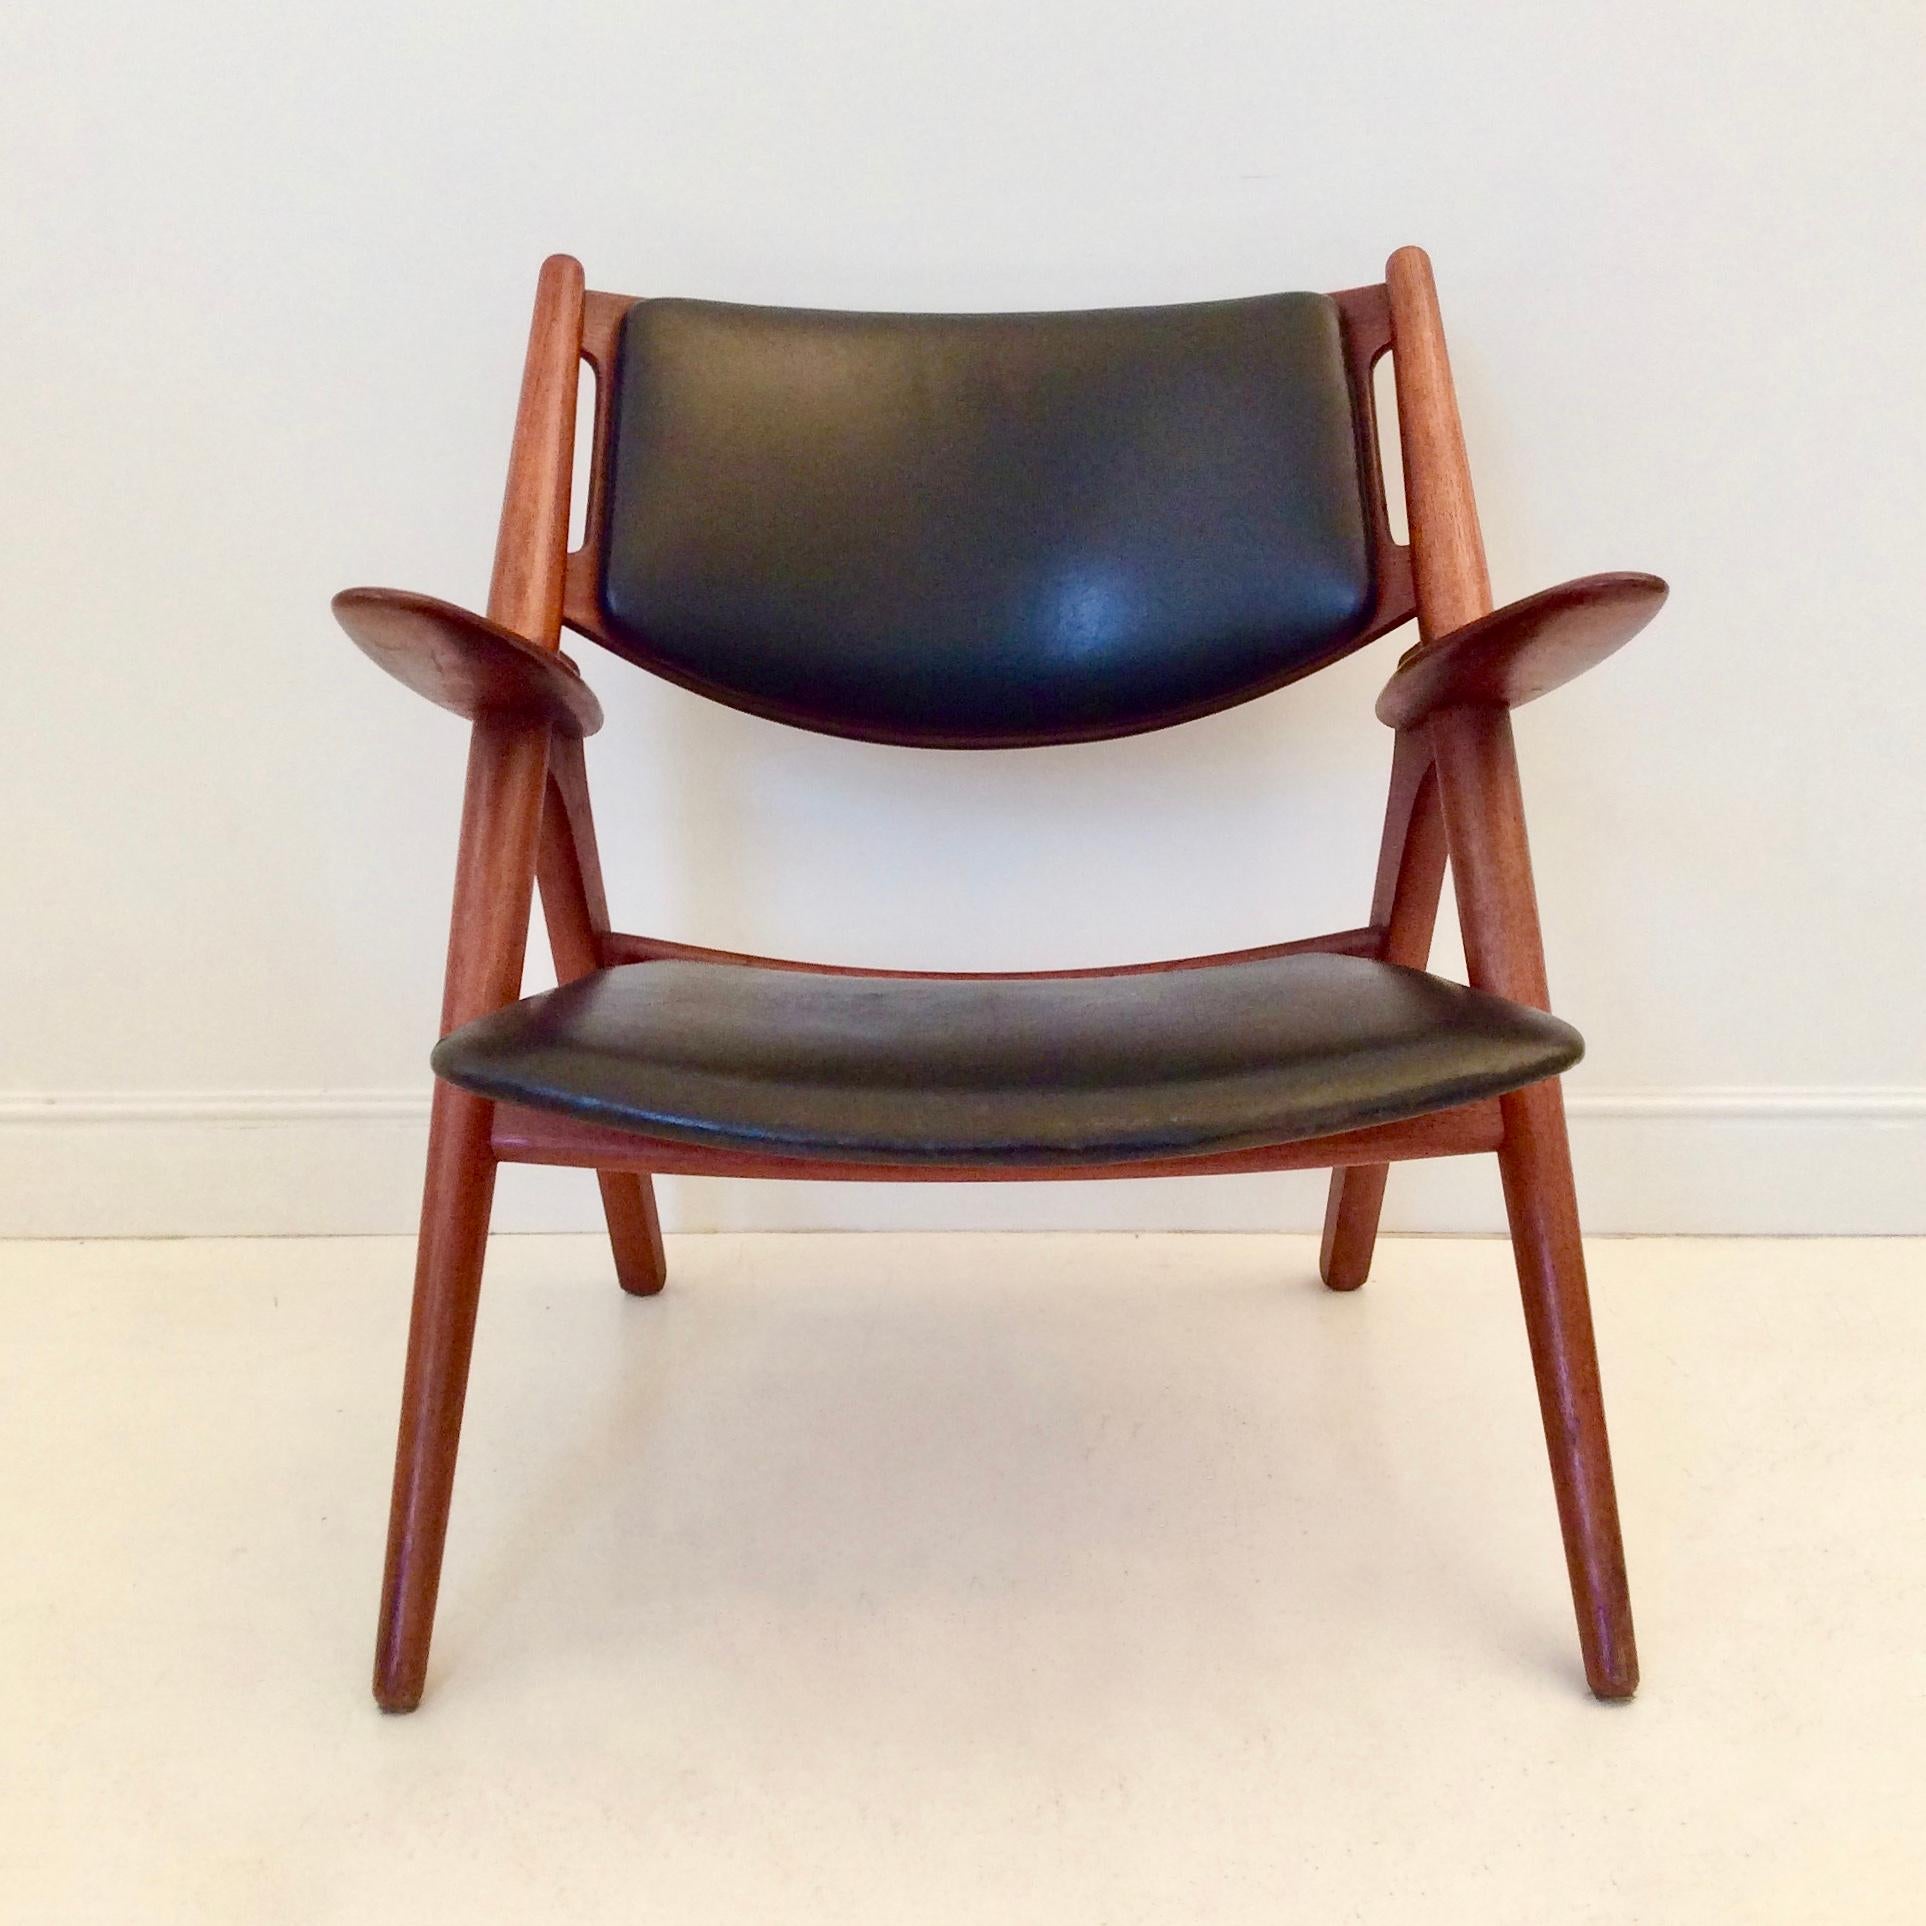 Hans J.Wegner CH28 Sawbuck armchair for Carl Hansen and Son, circa 1960, Denmark.
Teak and original black leather, nice patinated.
Designed in 1952.
Stamped underneath.
Dimensions: 73 cm H, 73 cm W, 68 cm D, seat height: 37 cm.
Good original